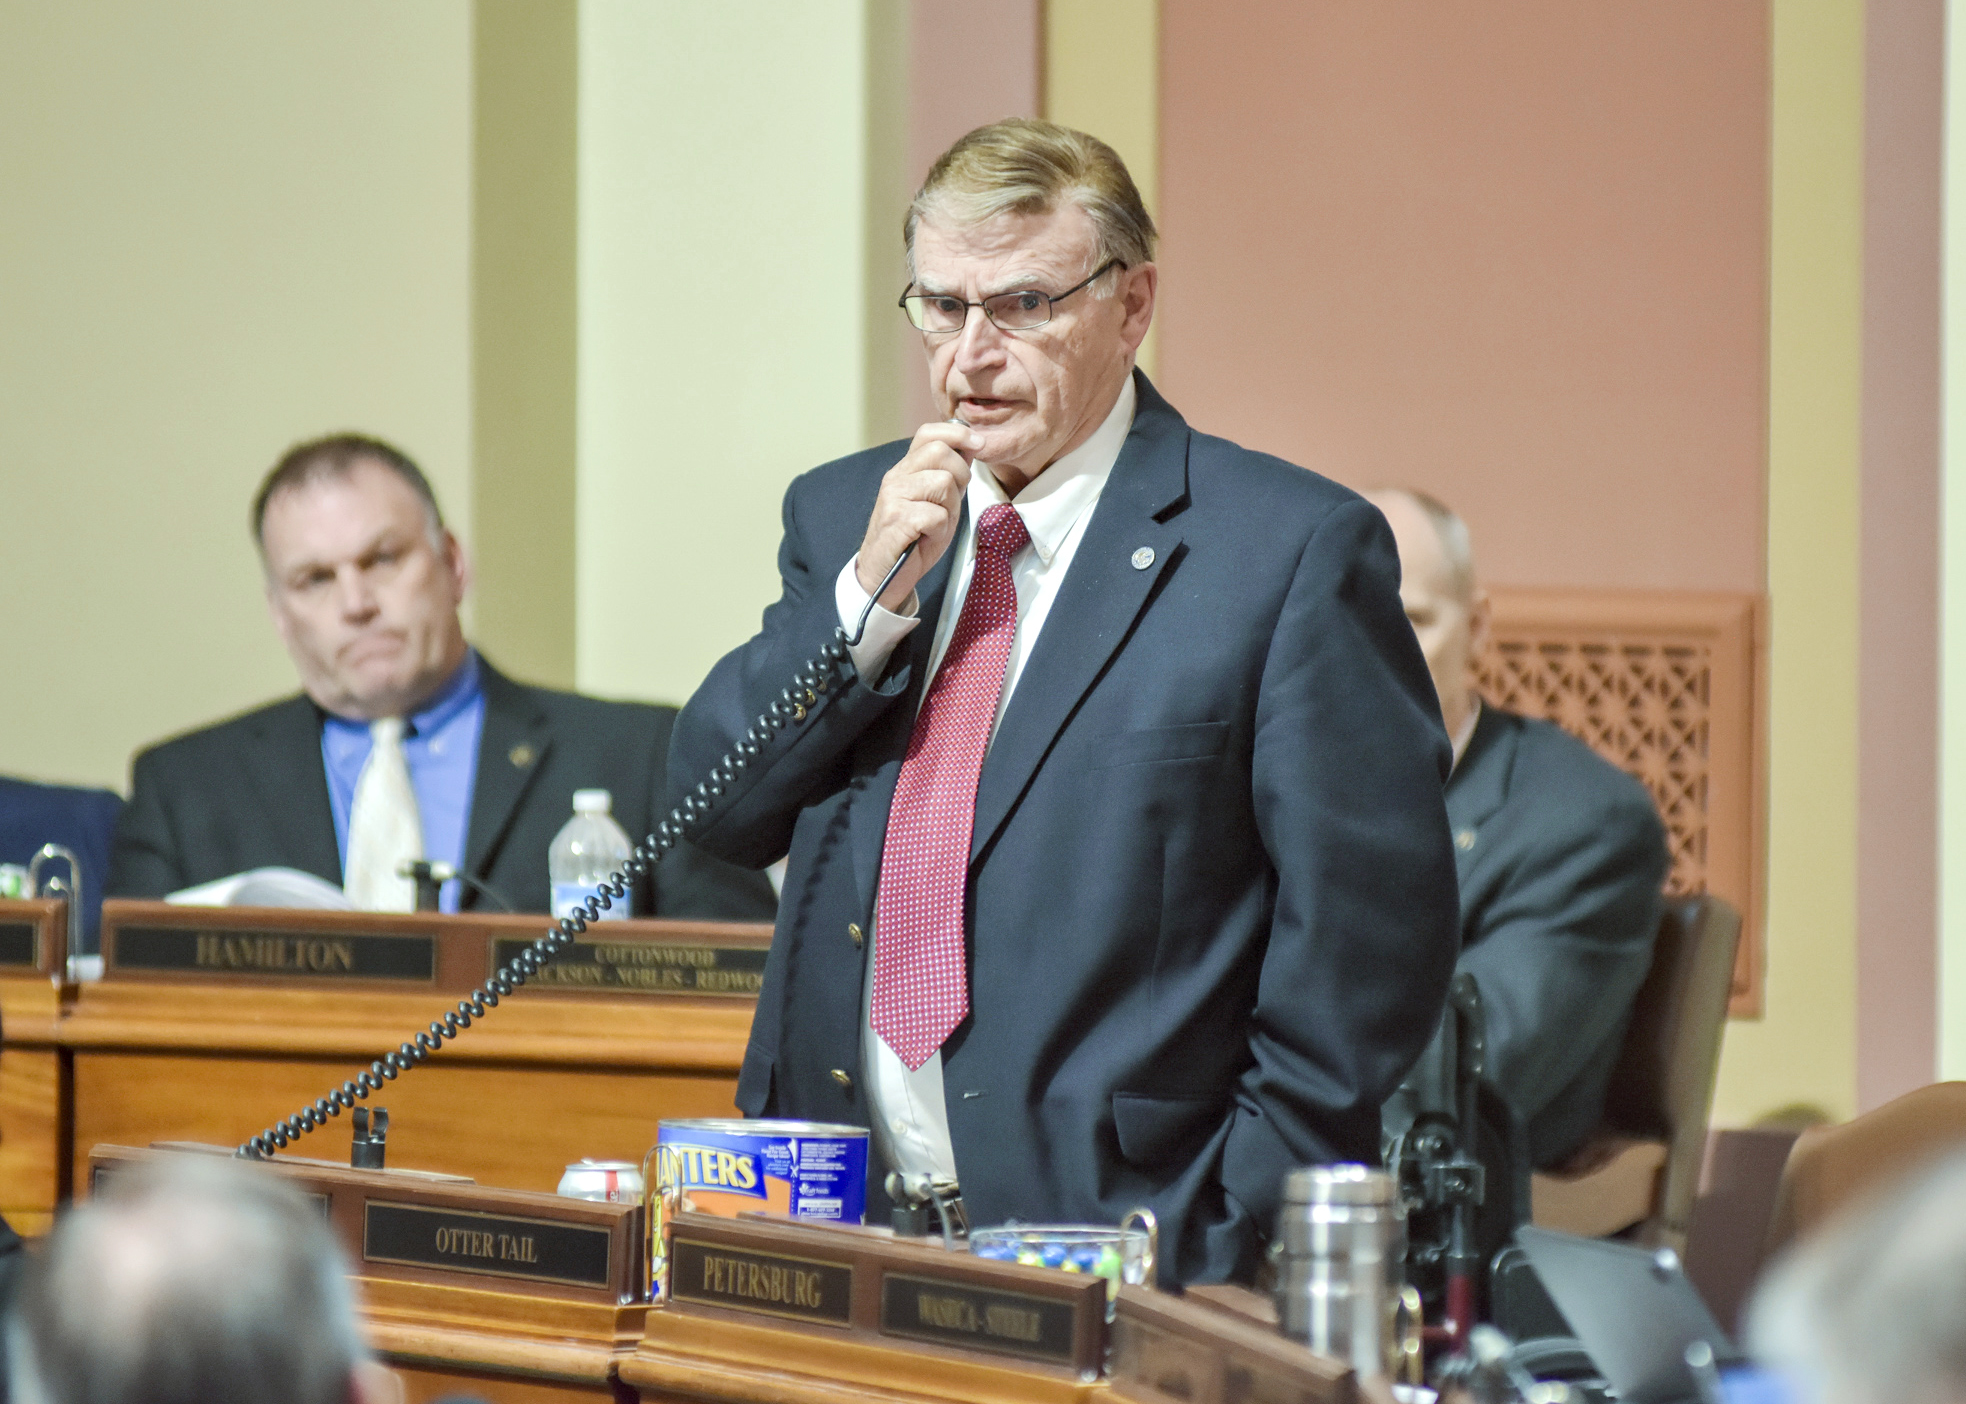 Rep. Bud Norness announced Monday that his service at the Legislature will come to an end after the 2020 session.